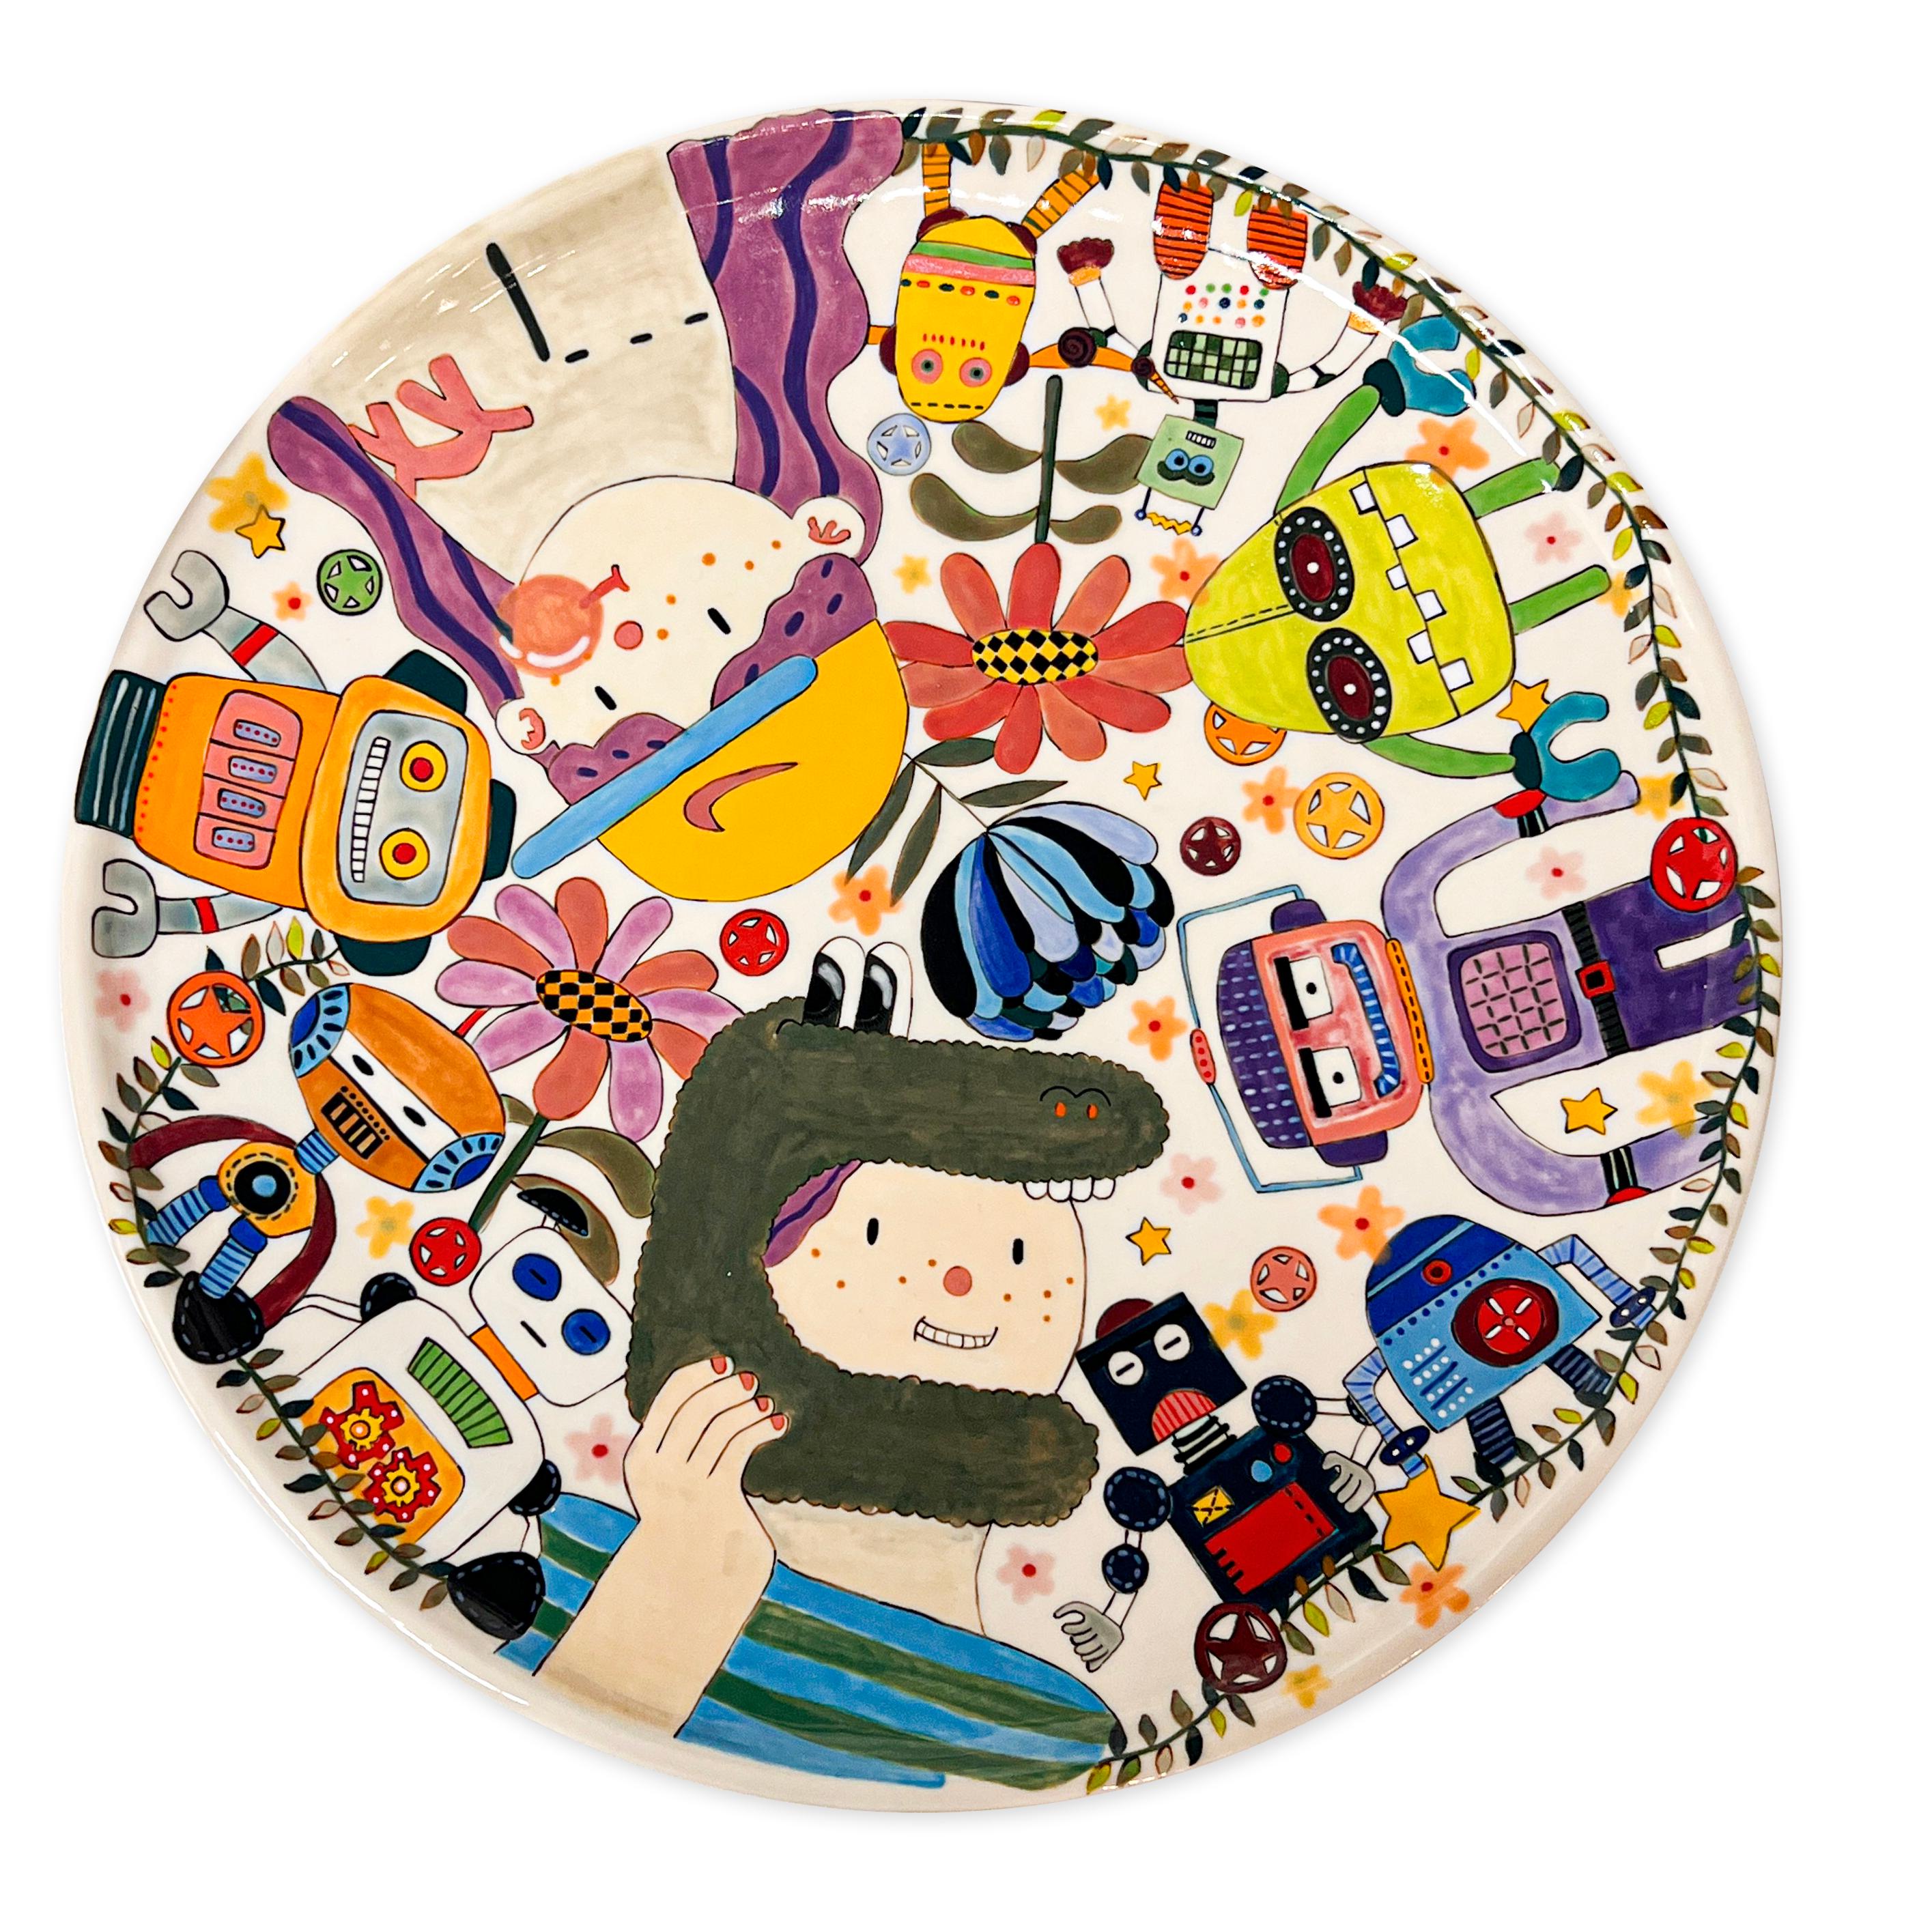 "A World of Its Own" Large Porcelain Plate with Colorful Figurative Elements - Sculpture by Jihye Han